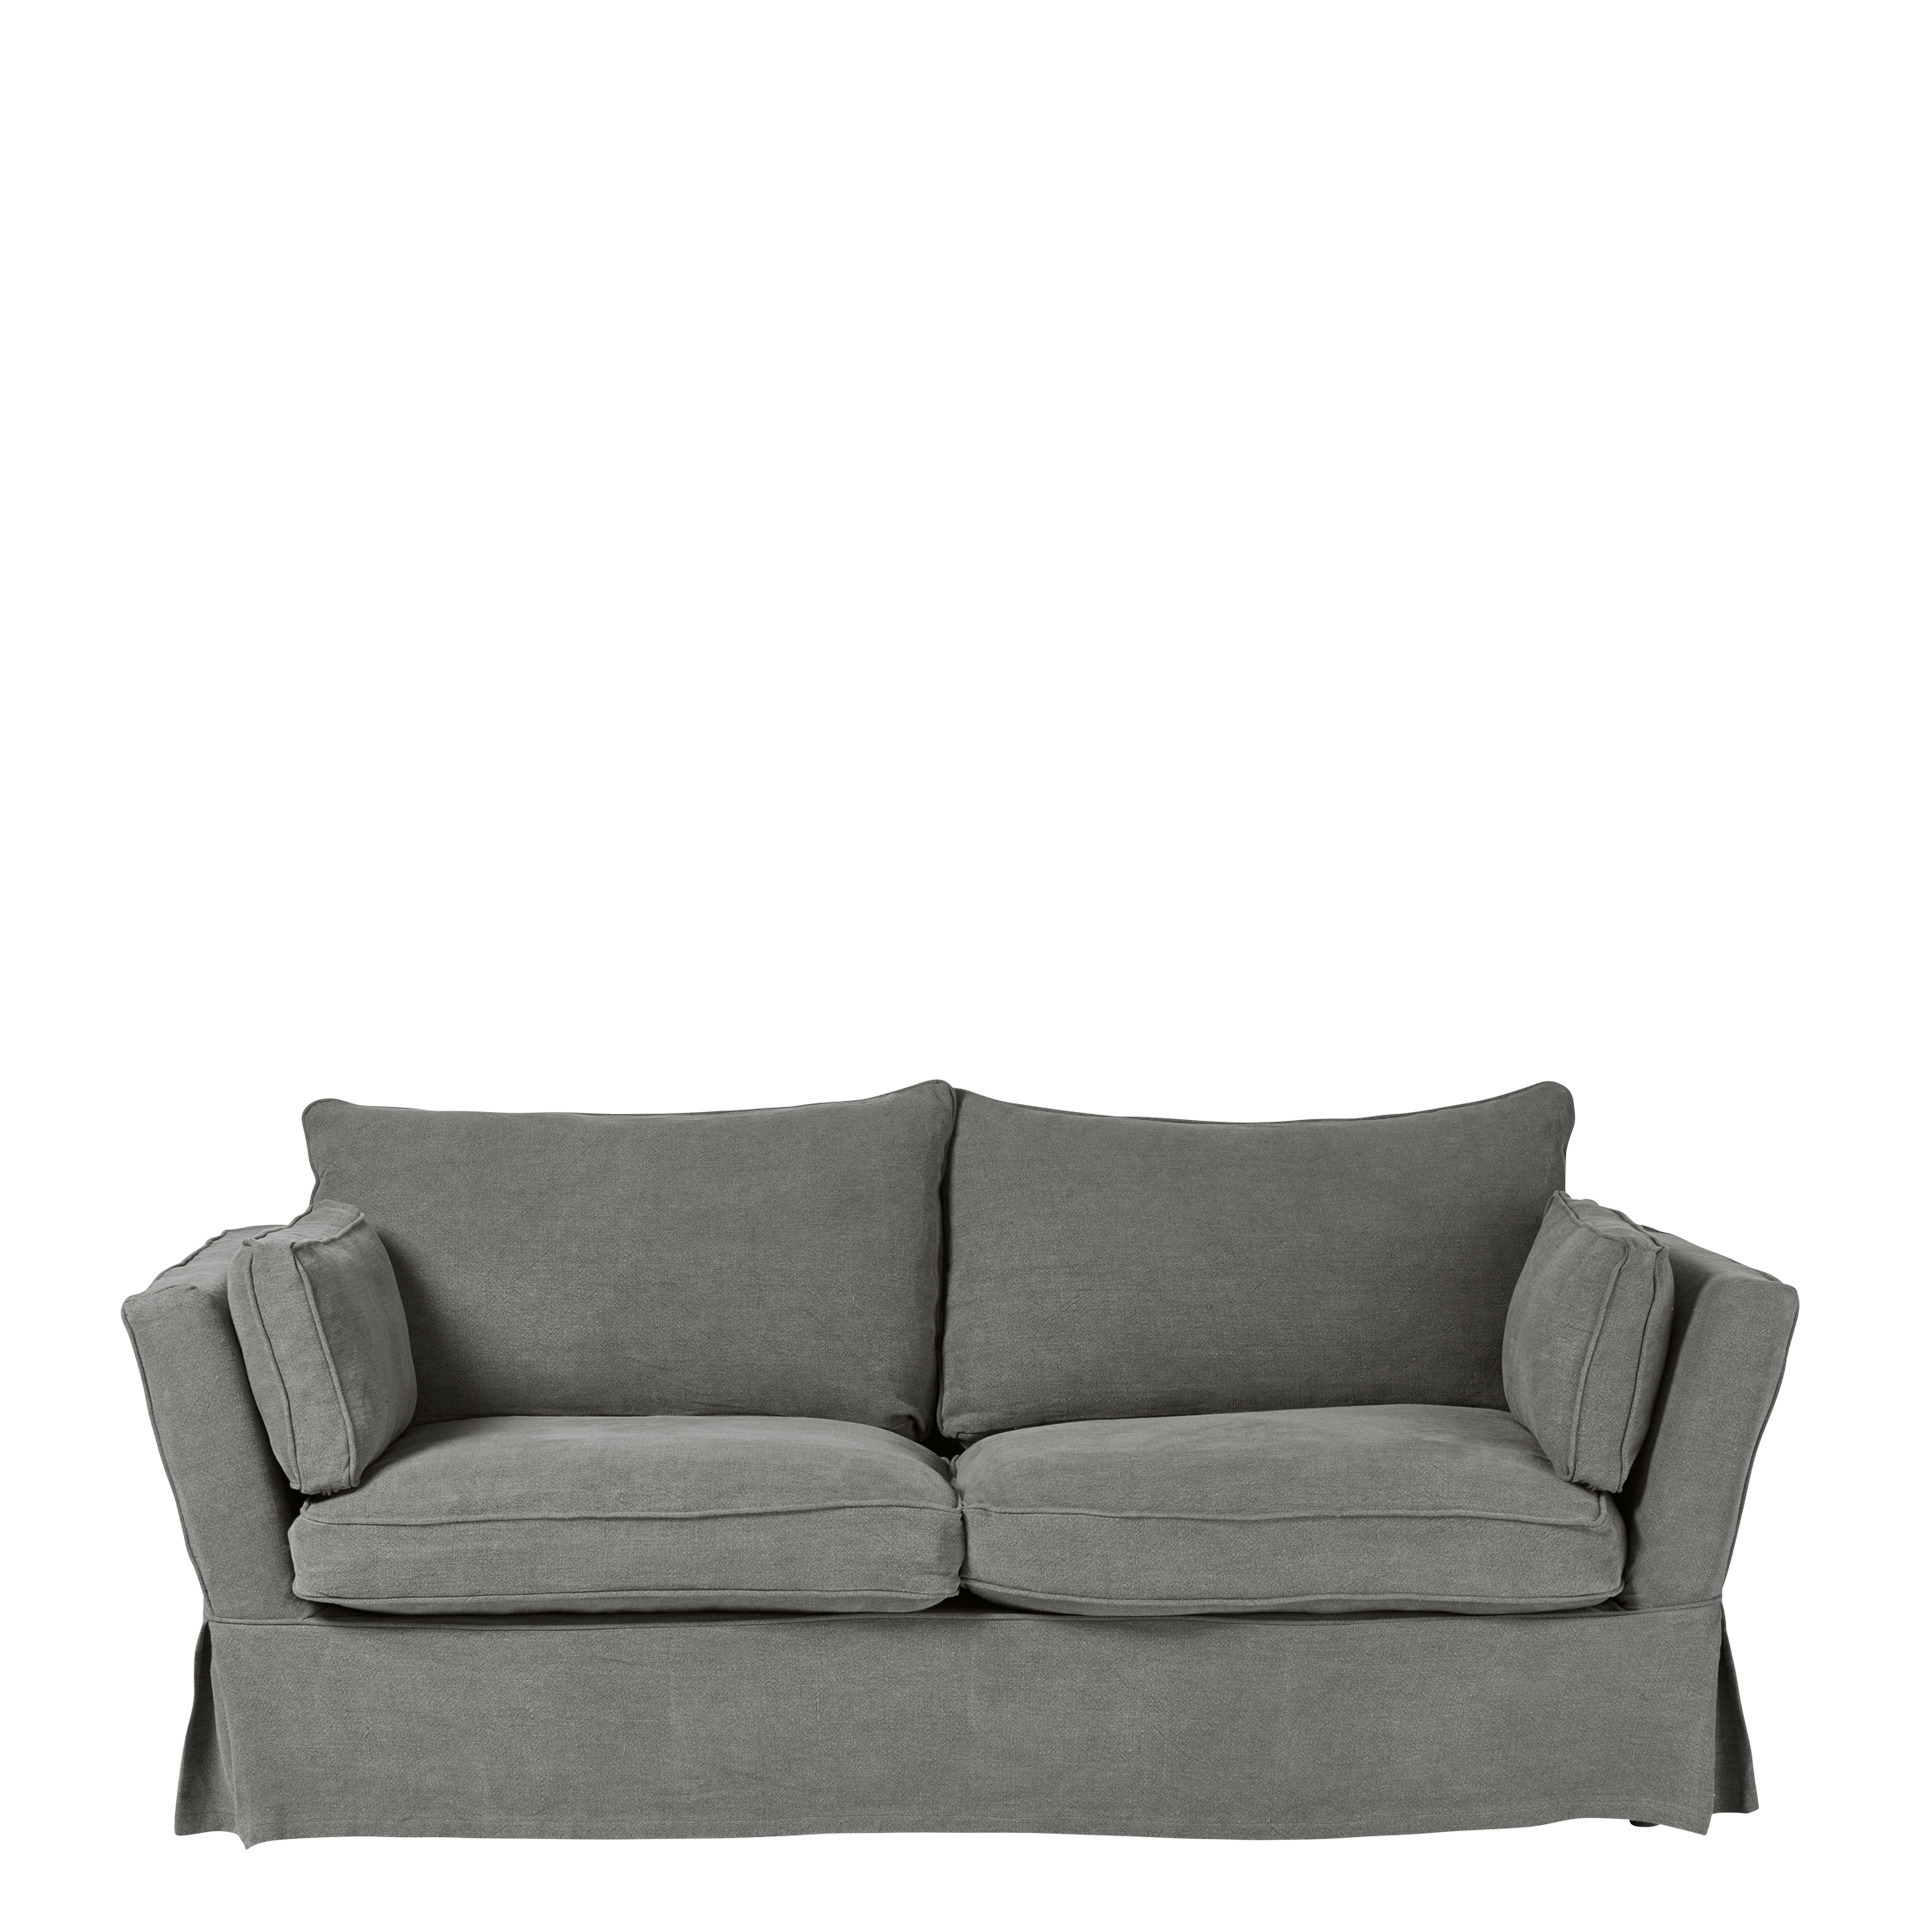 Aubourn 3 Seater Sofa Cover - Charcoal